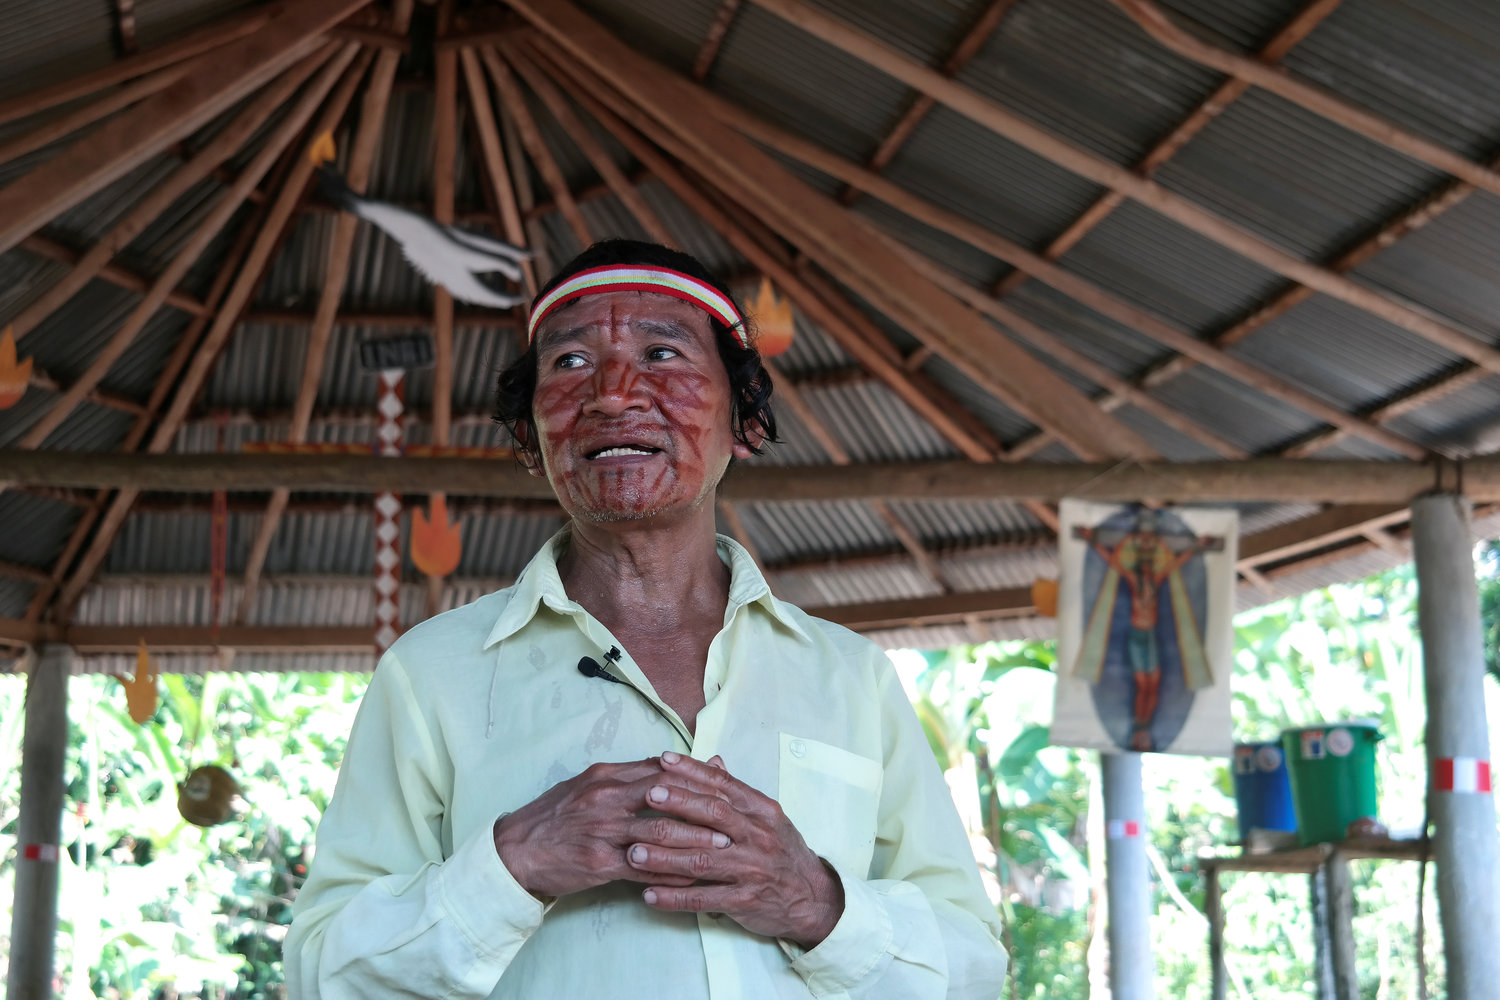 Deacon Shainkiam Yampik Wananch prays in a chapel in Wijint, a village in the Peruvian Amazon, Aug. 20, 2019. In Pope Francis’ postsynodal apostolic exhortation, “Querida Amazonia,” released Feb. 12, 2020, the Pontiff acknowledged the serious shortage of priests in remote areas of the Amazon, but he insisted not all avenues have been exhausted to address the issue.